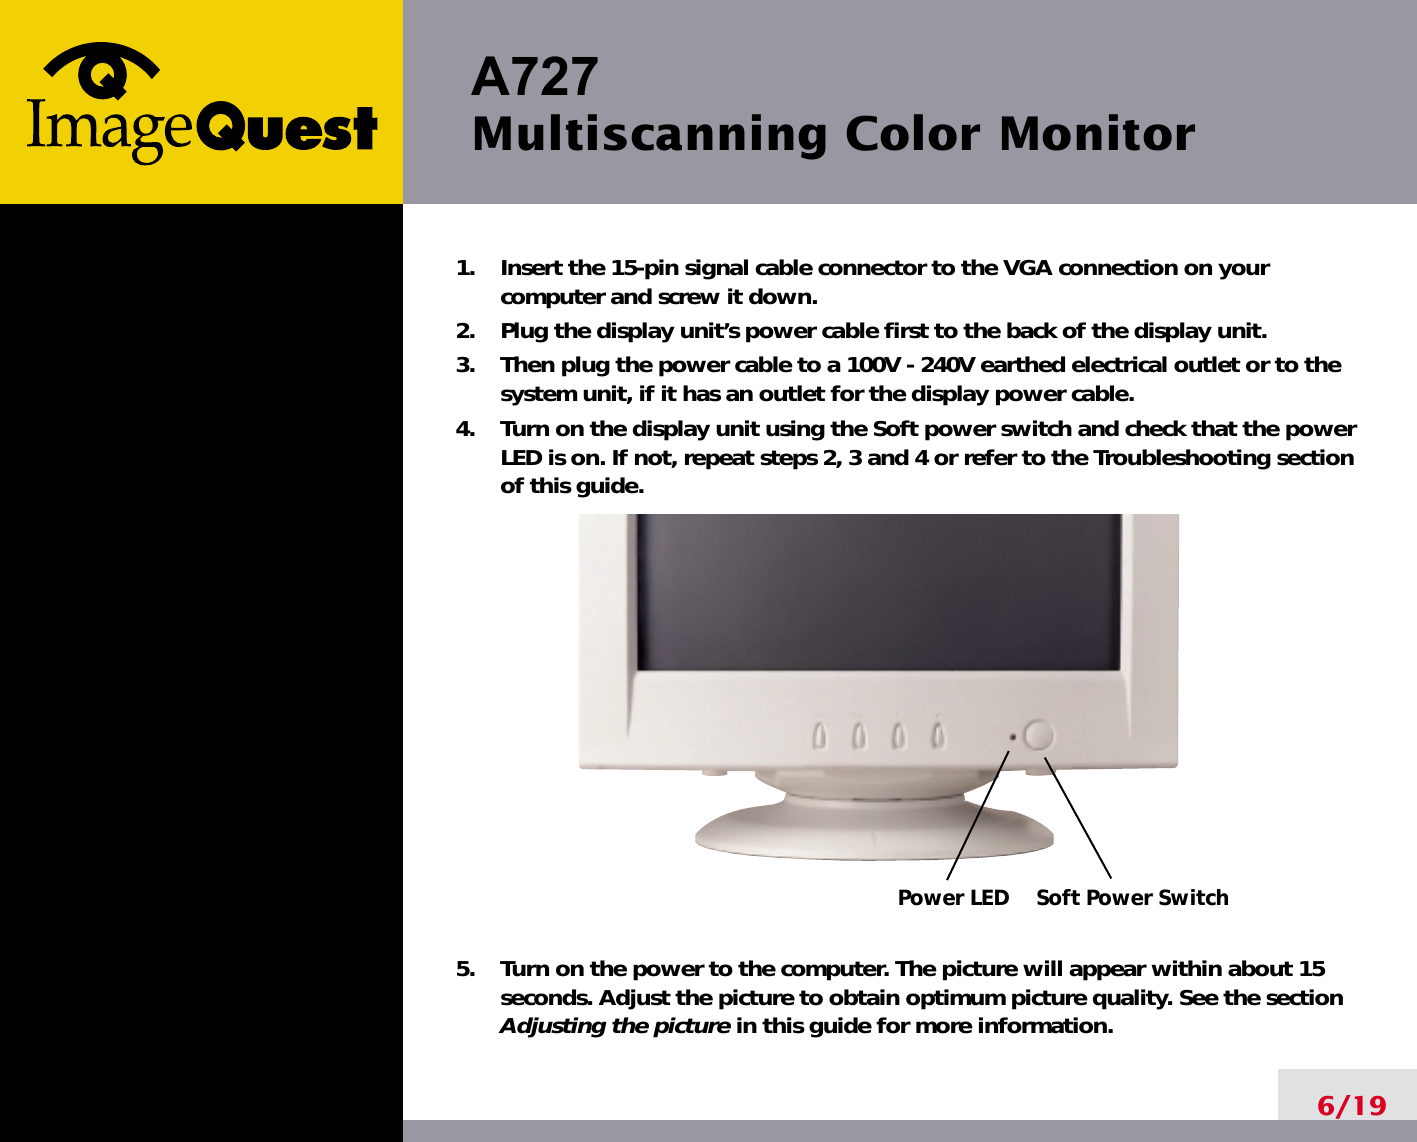 A727 Multiscanning Color Monitor6/191.    Insert the 15-pin signal cable connector to the VGA connection on yourcomputer and screw it down.2.    Plug the display unit’s power cable first to the back of the display unit.3.    Then plug the power cable to a 100V - 240V earthed electrical outlet or to thesystem unit, if it has an outlet for the display power cable.4.    Turn on the display unit using the Soft power switch and check that the powerLED is on. If not, repeat steps 2, 3 and 4 or refer to the Troubleshooting sectionof this guide.5.    Turn on the power to the computer. The picture will appear within about 15seconds. Adjust the picture to obtain optimum picture quality. See the sectionAdjusting the picture in this guide for more information.Soft Power SwitchPower LED